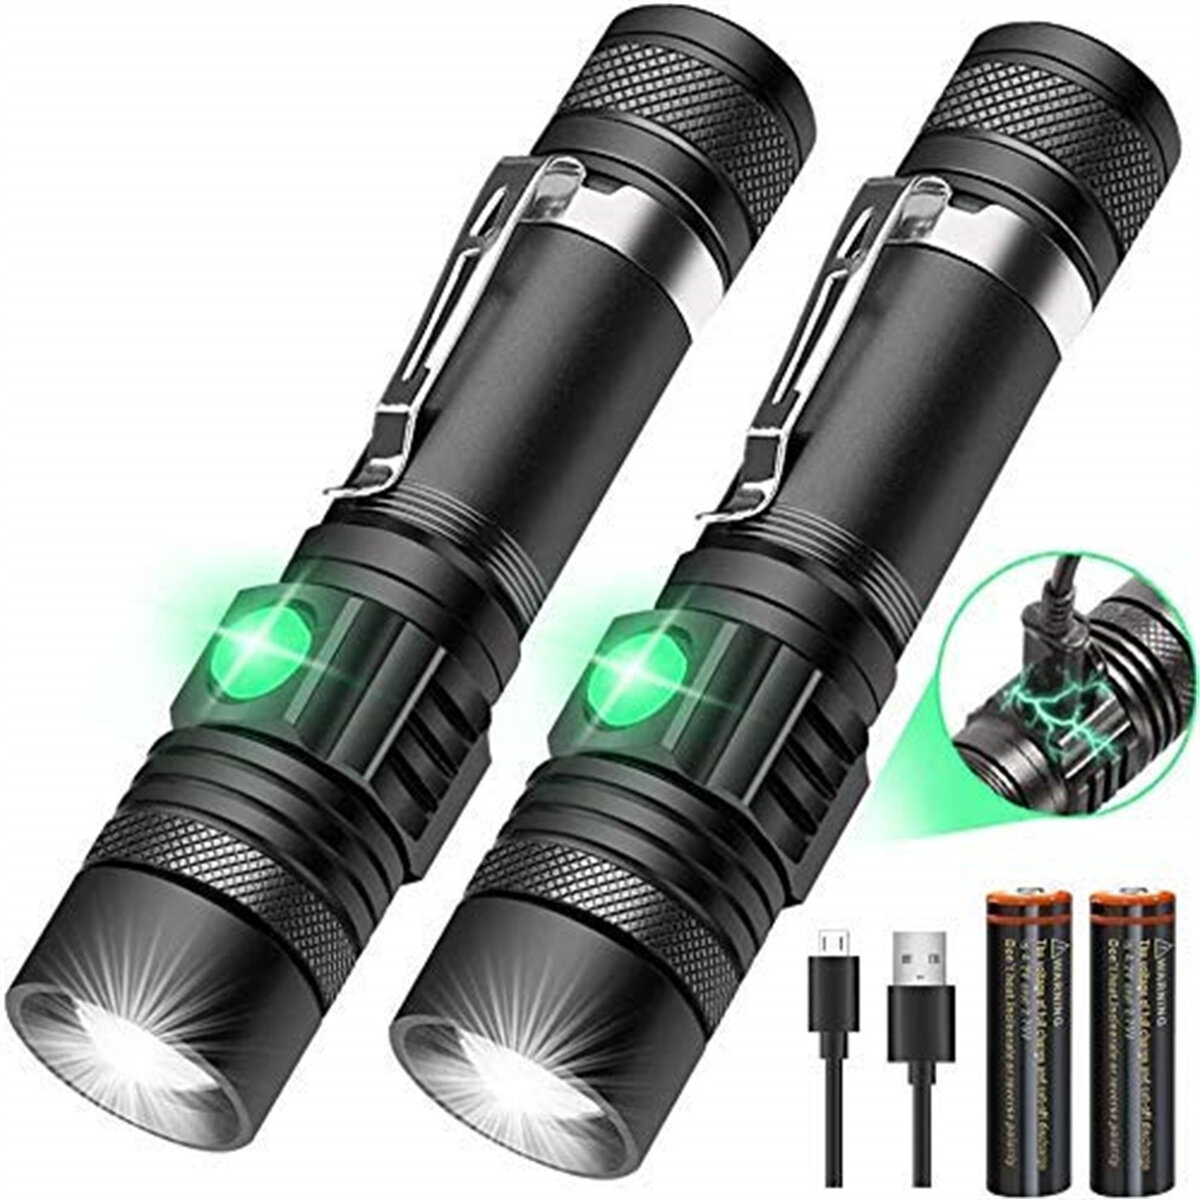 Flashlight Rechargeable 18650 Battery Tactical USB Waterproof Light Zoomable